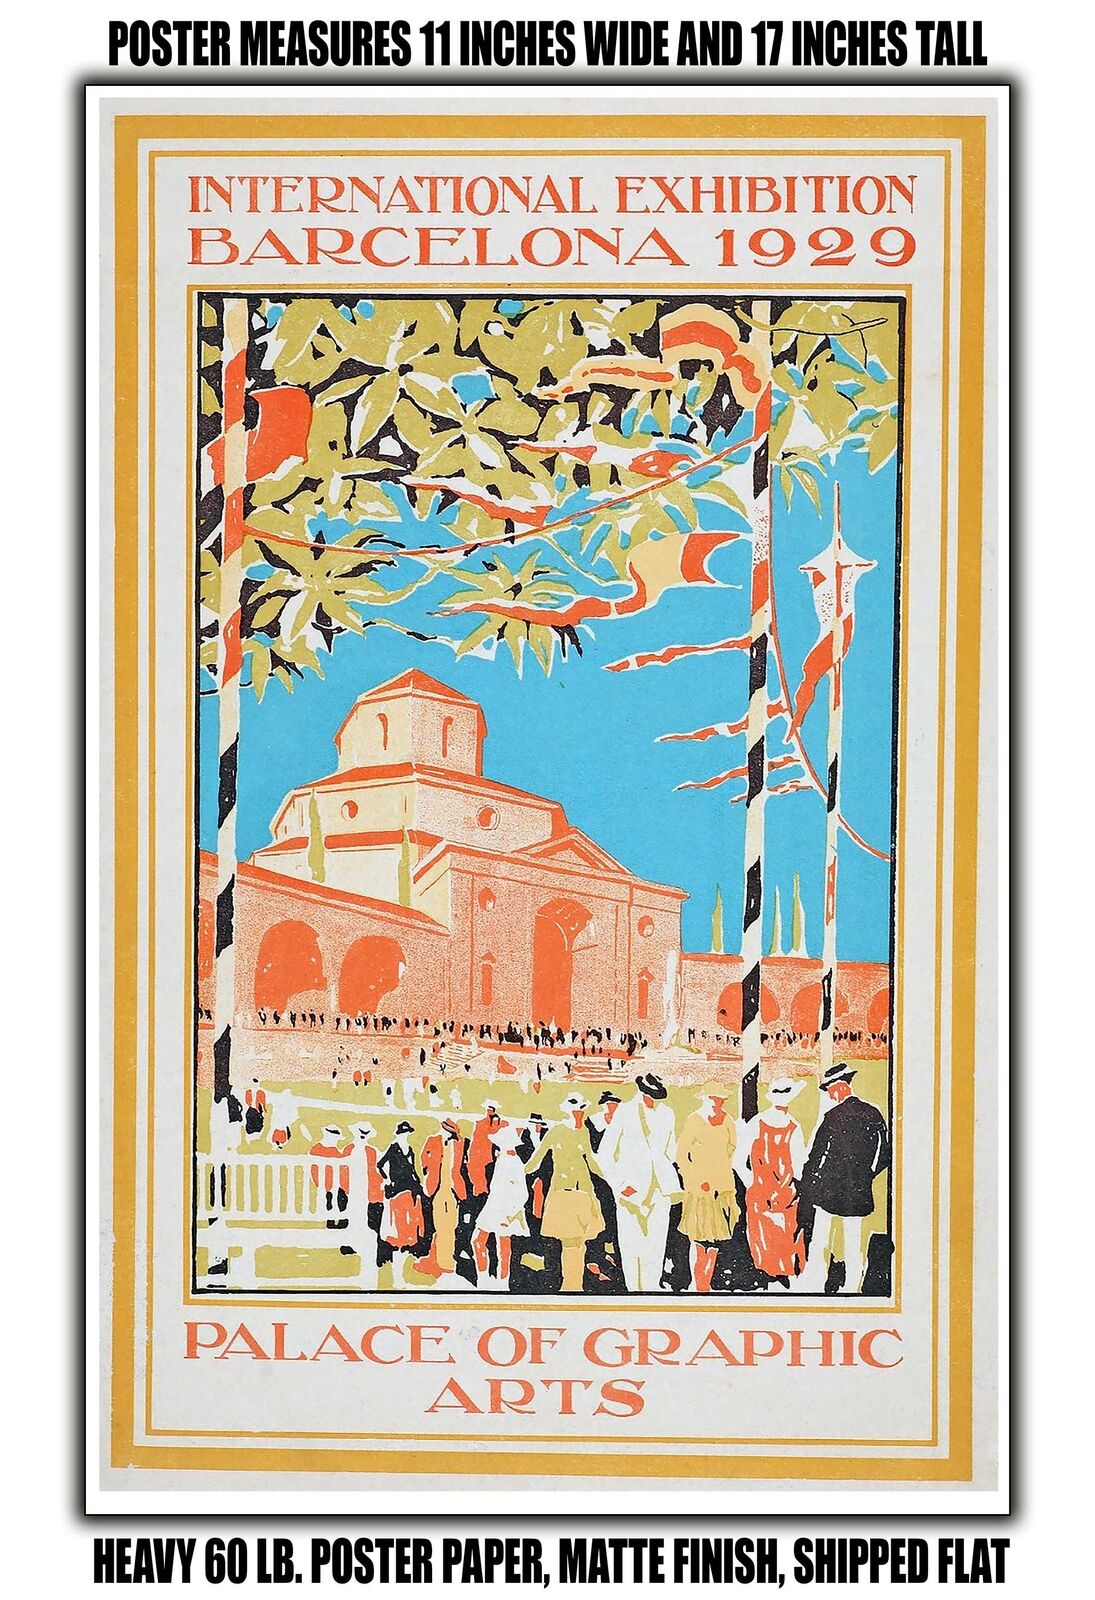 11x17 POSTER - 1929 International Exhibition Barcelona Palace of Graphic Arts